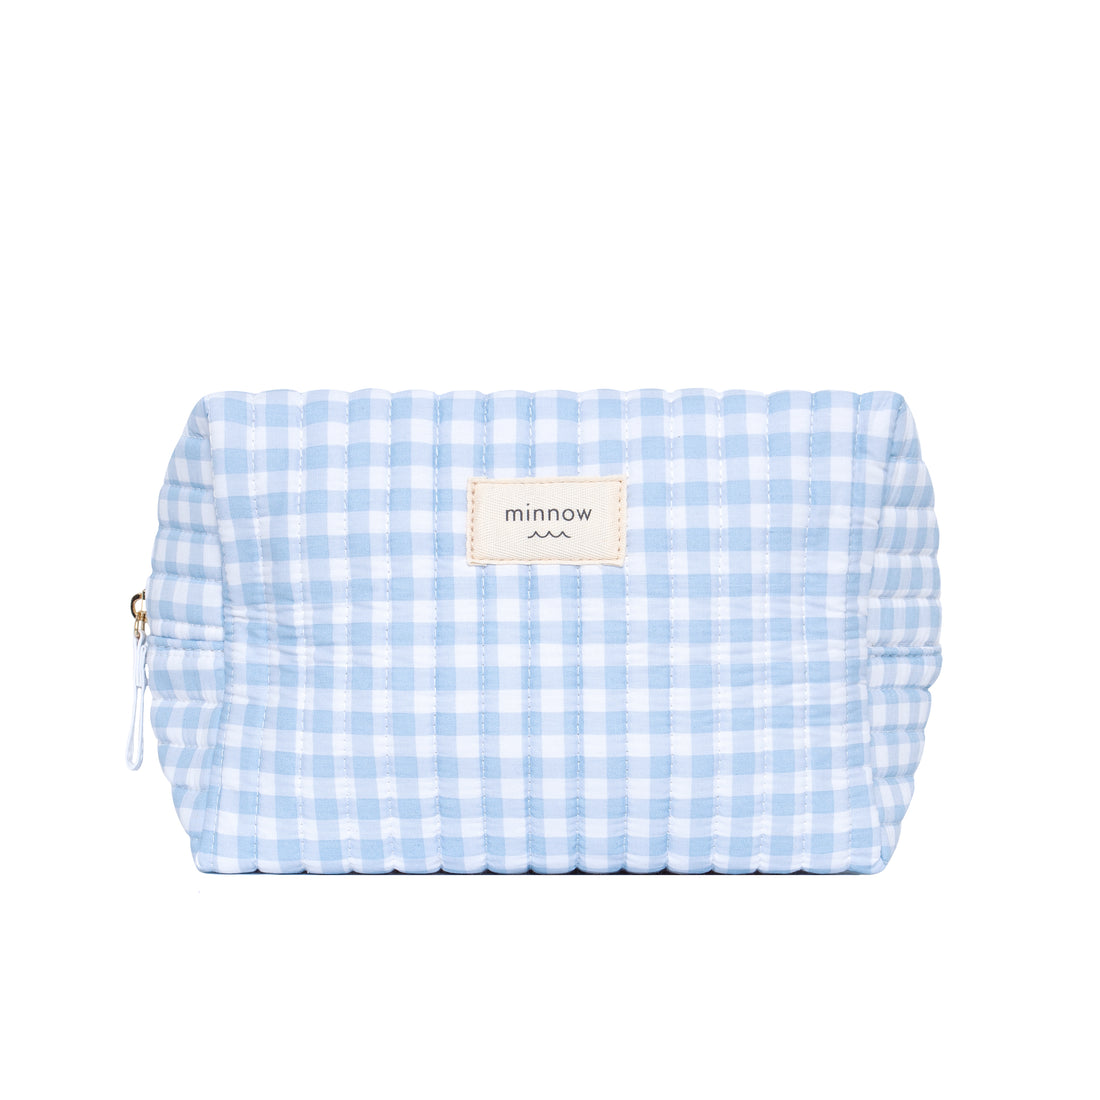 oasis blue gingham cosmetic case